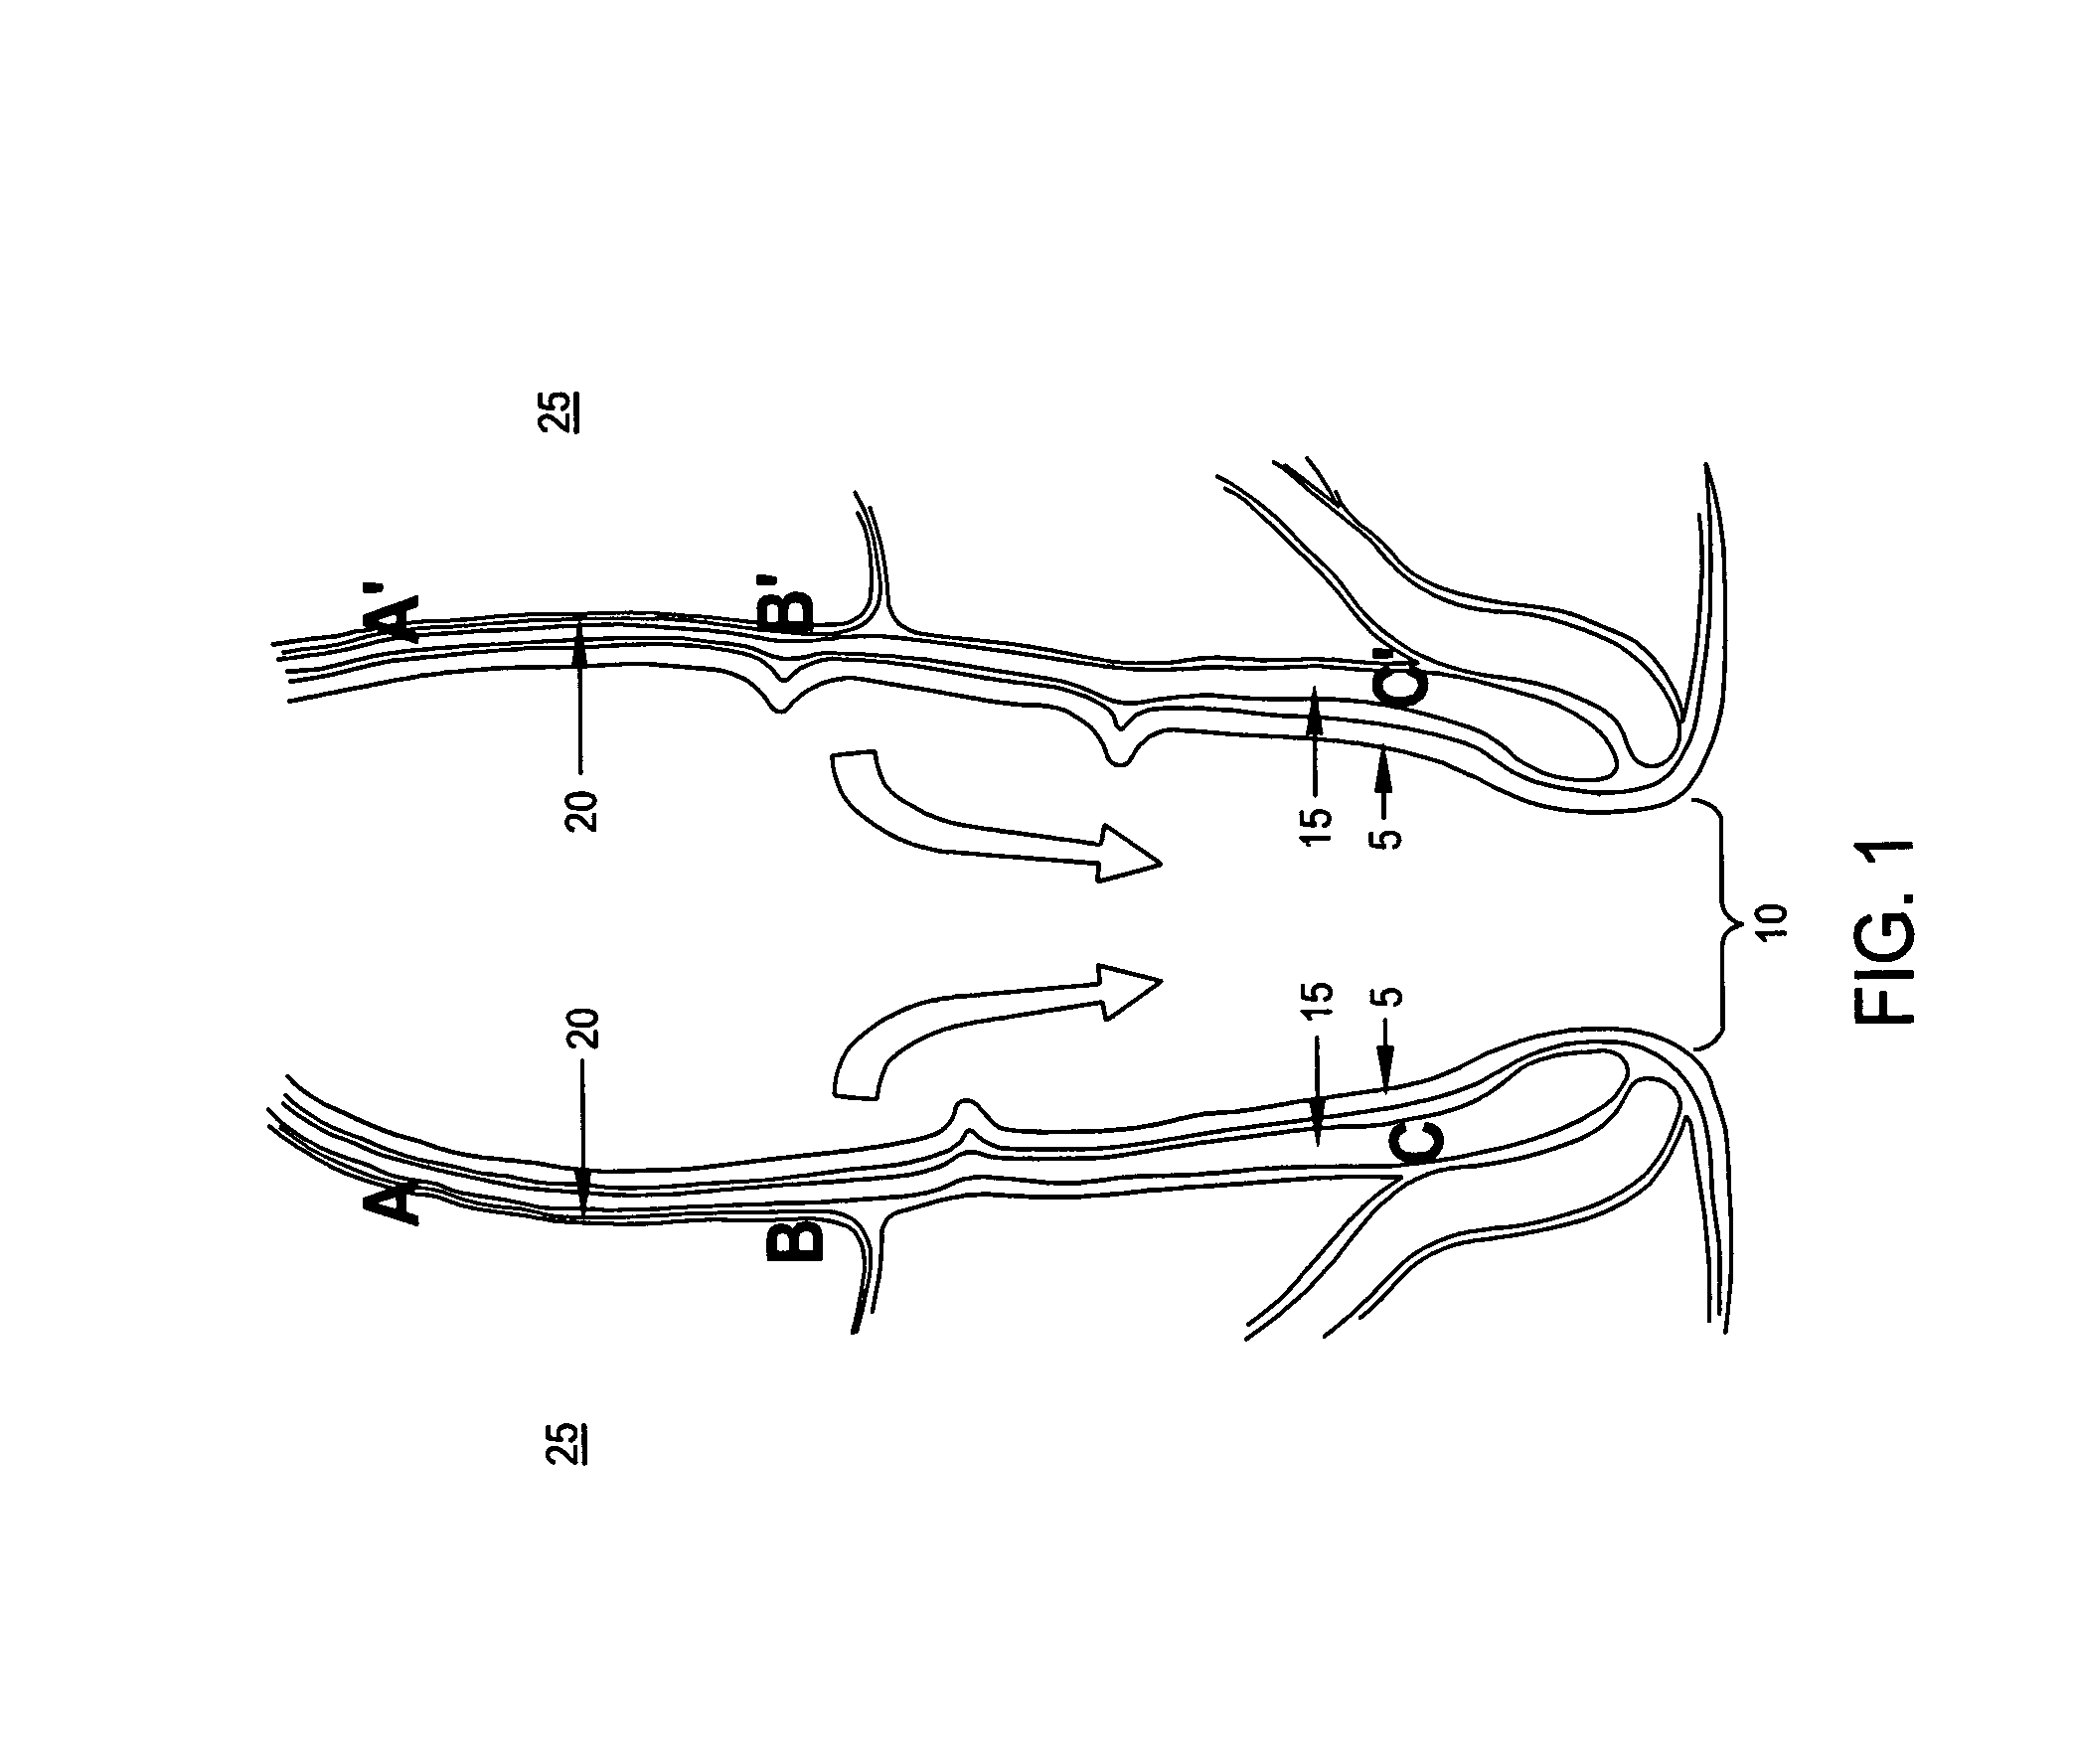 Method and apparatus for endoscopically treating rectal prolapse